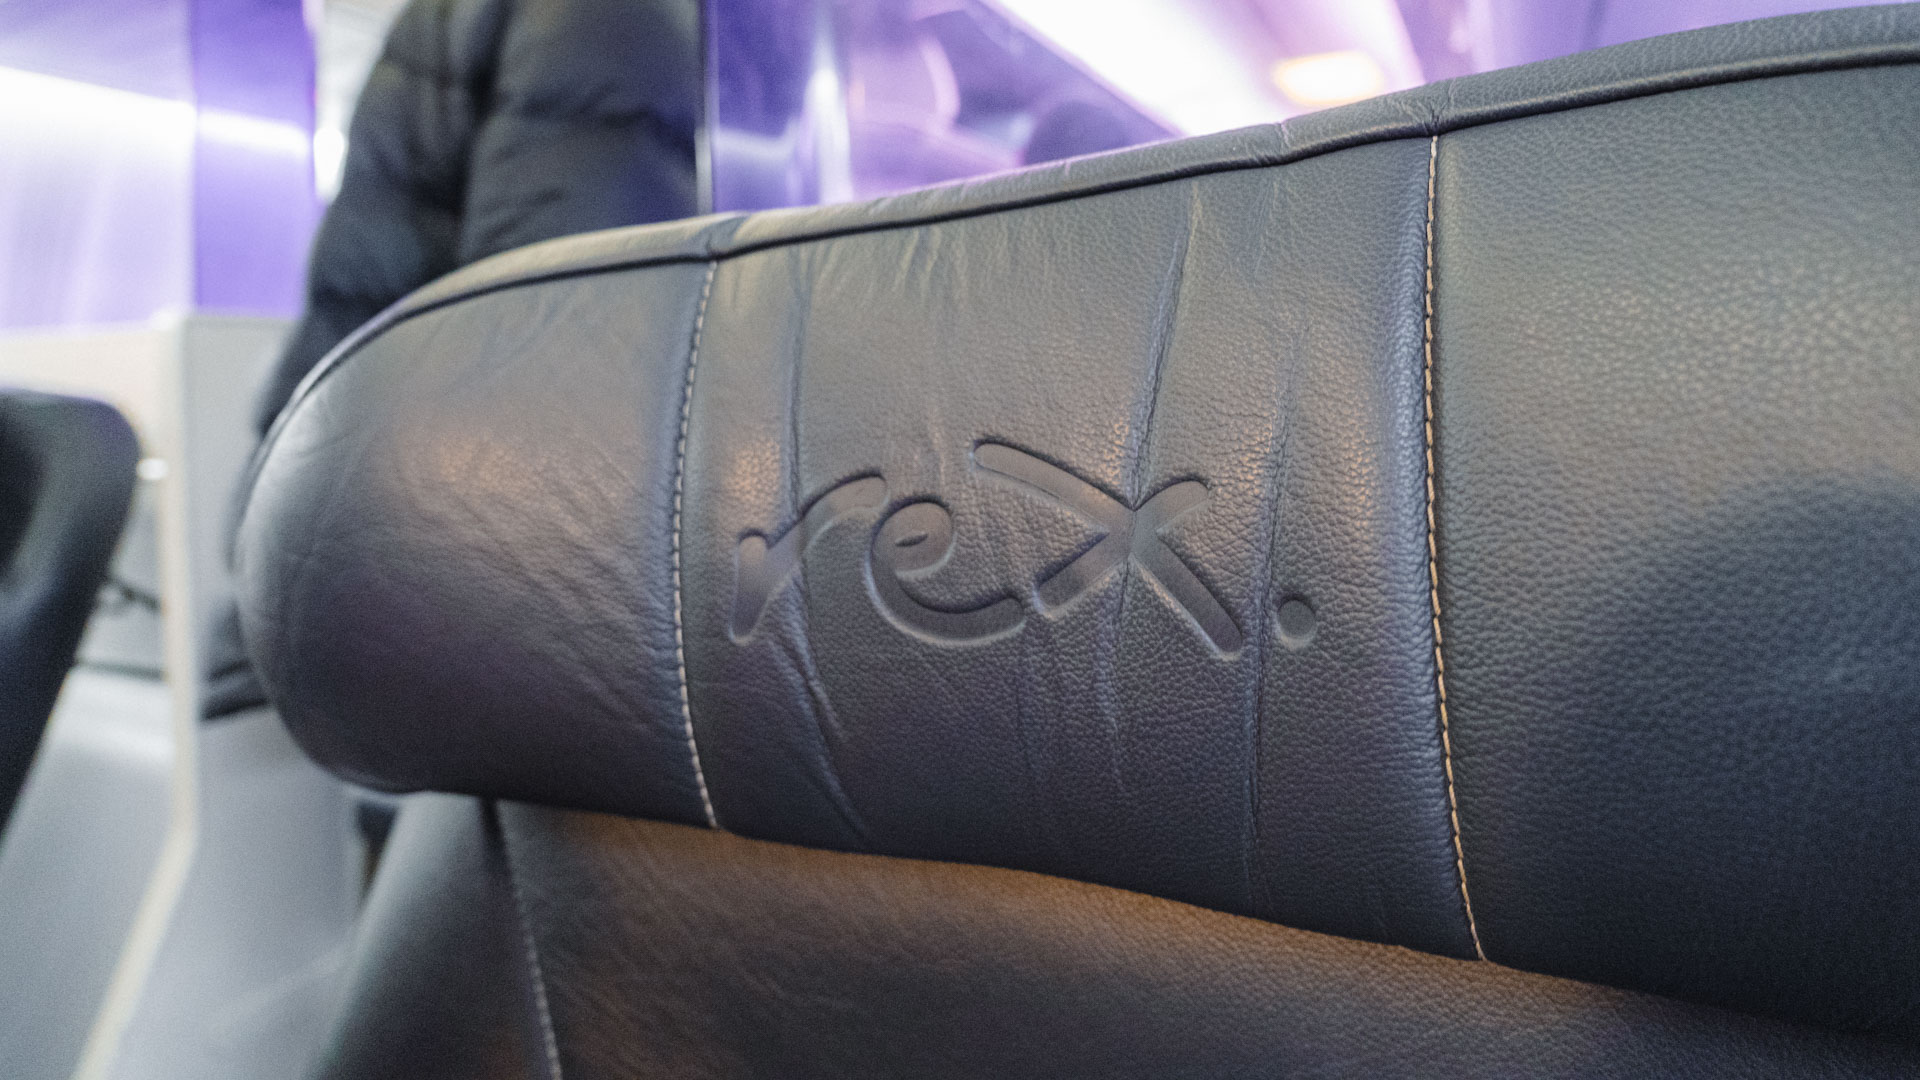 Rex Melbourne-Perth Business Class upholstery.